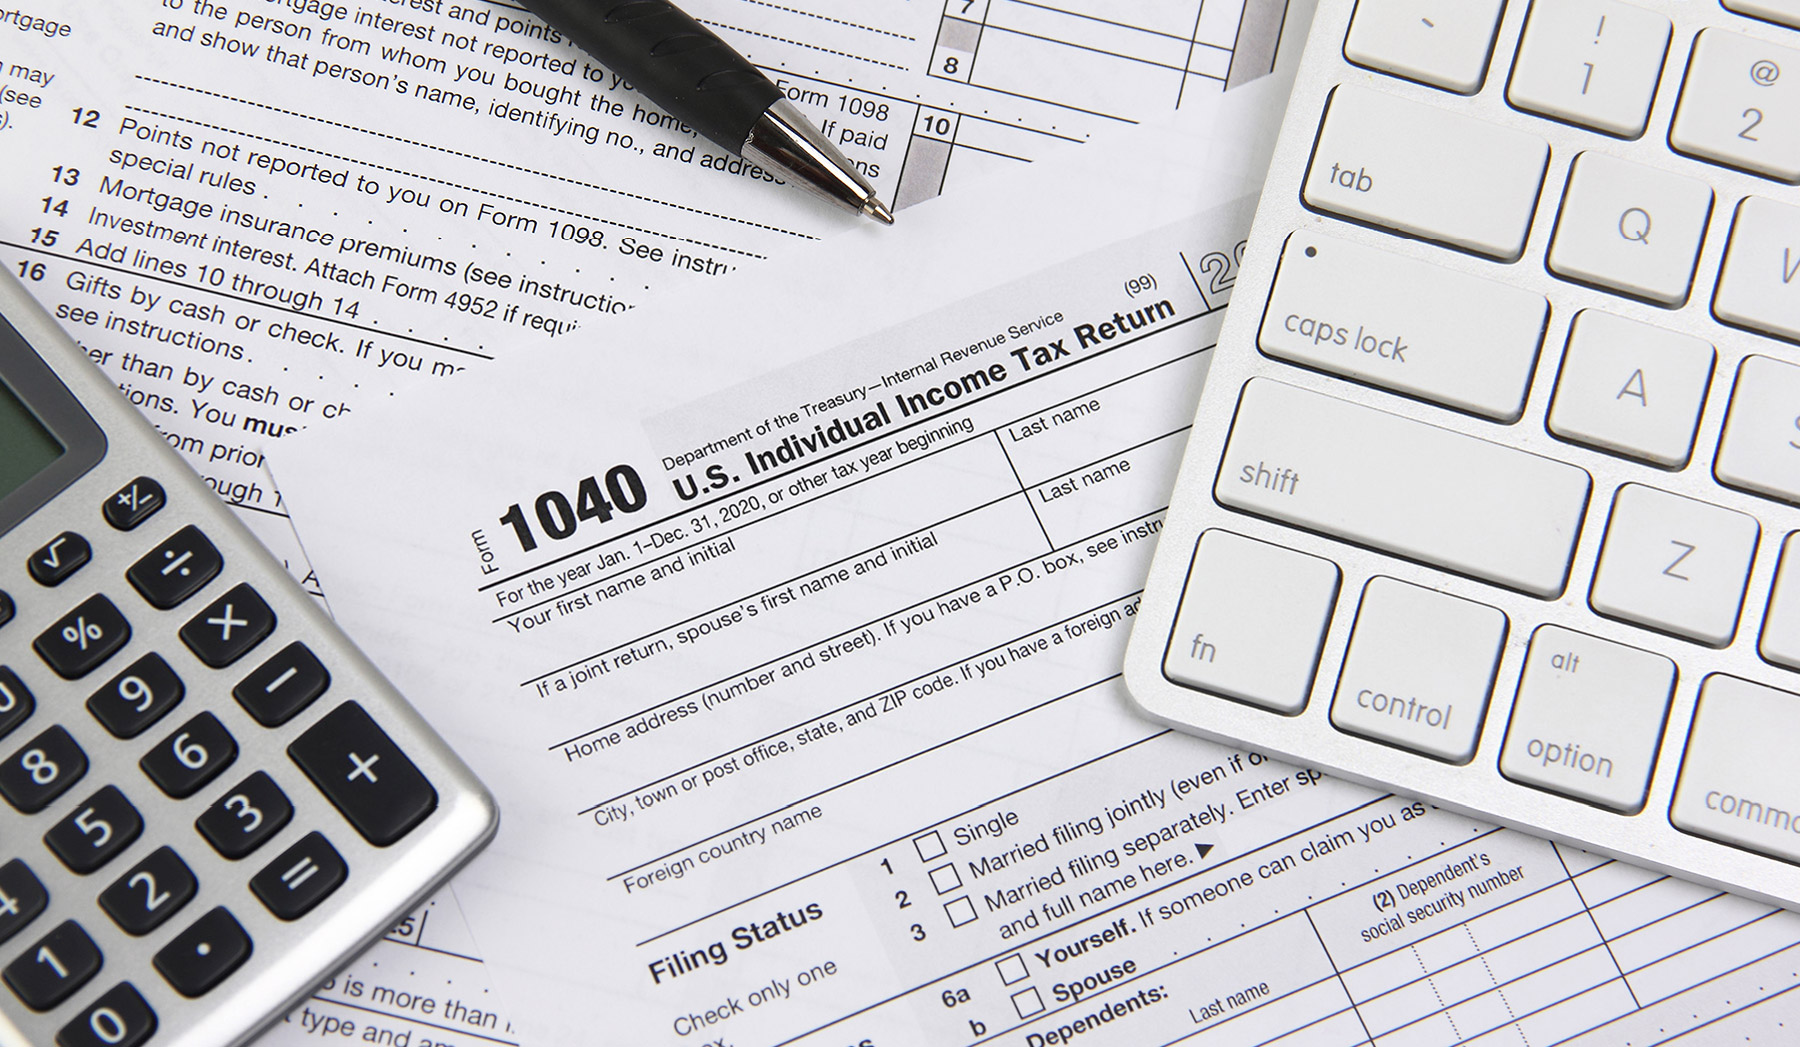 File My Taxes in Elizabeth, Linden, Newark, Rahway, and Woodbridge Township